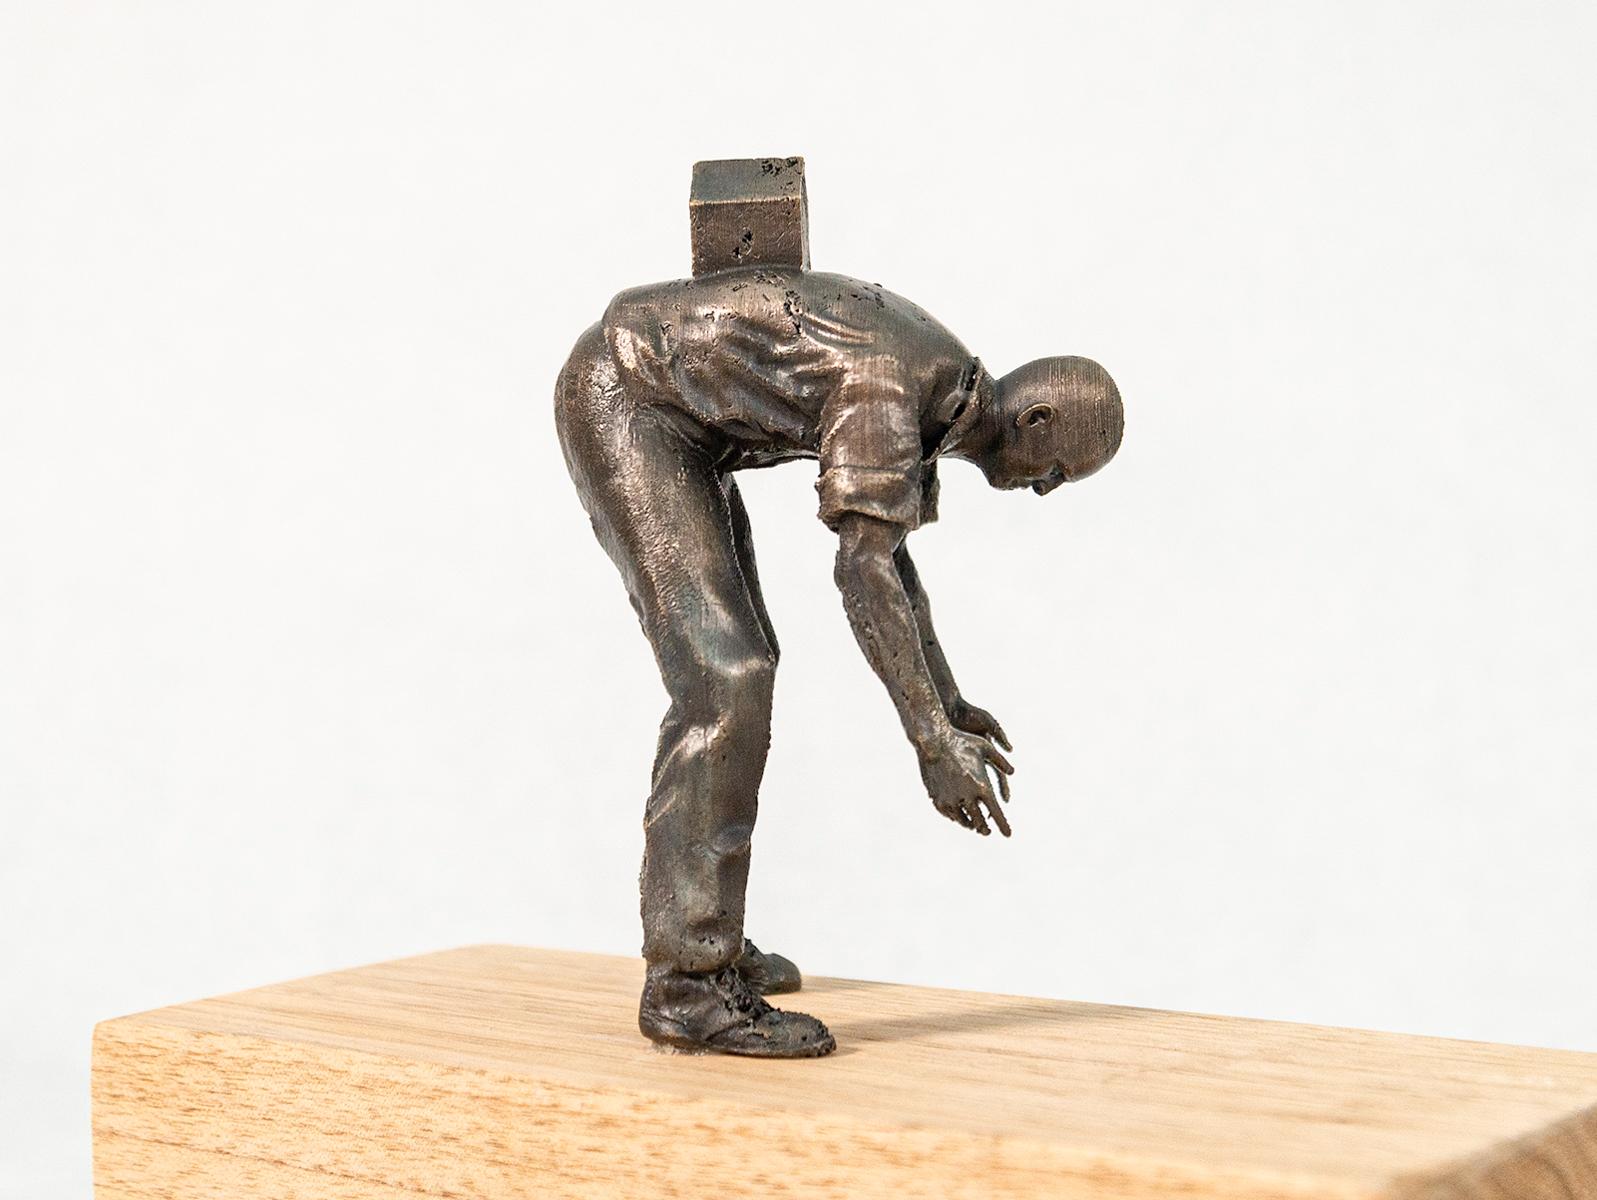 Toronto artist Roch Smith often uses toy figures in clever and fun ways to convey cultural statements that go beyond child’s play. This tabletop figure is bending over, arms extended as if he’s trying to grasp something, a small house sits on his